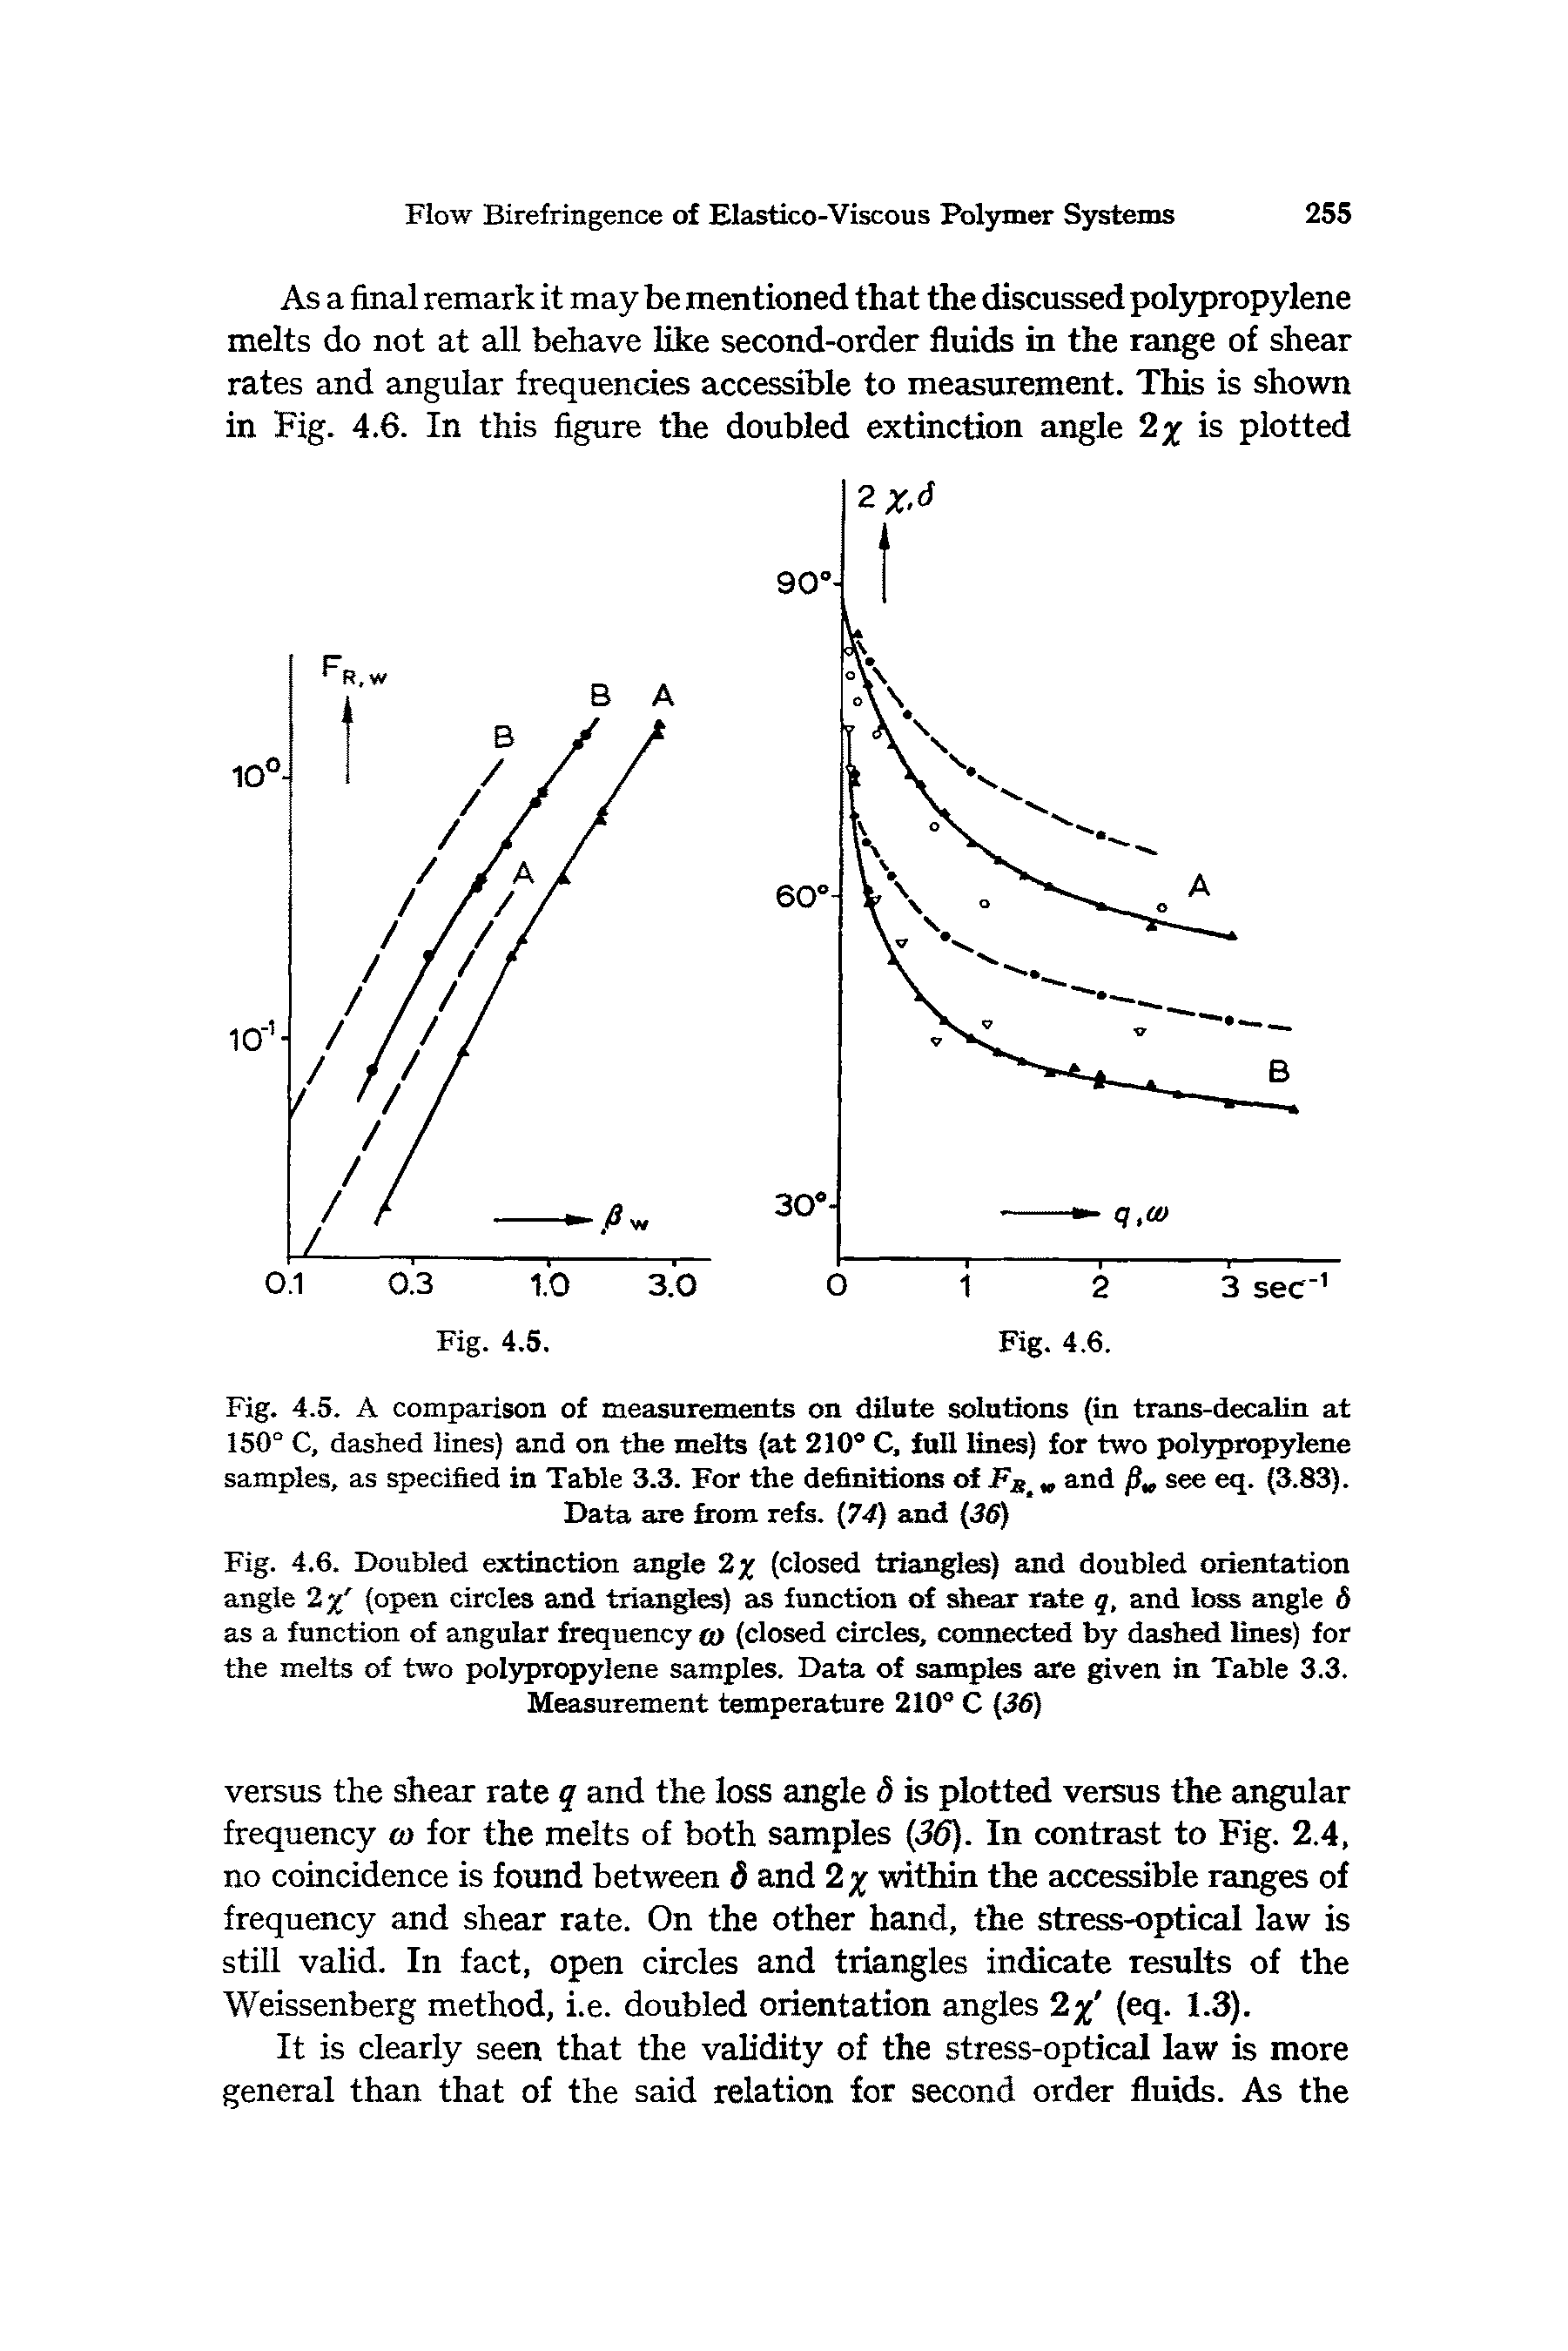 Fig. 4.5. A comparison of measurements on dilute solutions (in trans-decalin at 150° C, dashed lines) and on the melts (at 210° C, full lines) for two polypropylene samples, as specified in Table 3.3. For the definitions of FSi and see eq. (3.83). Bata are from refs. (74) and (36)...